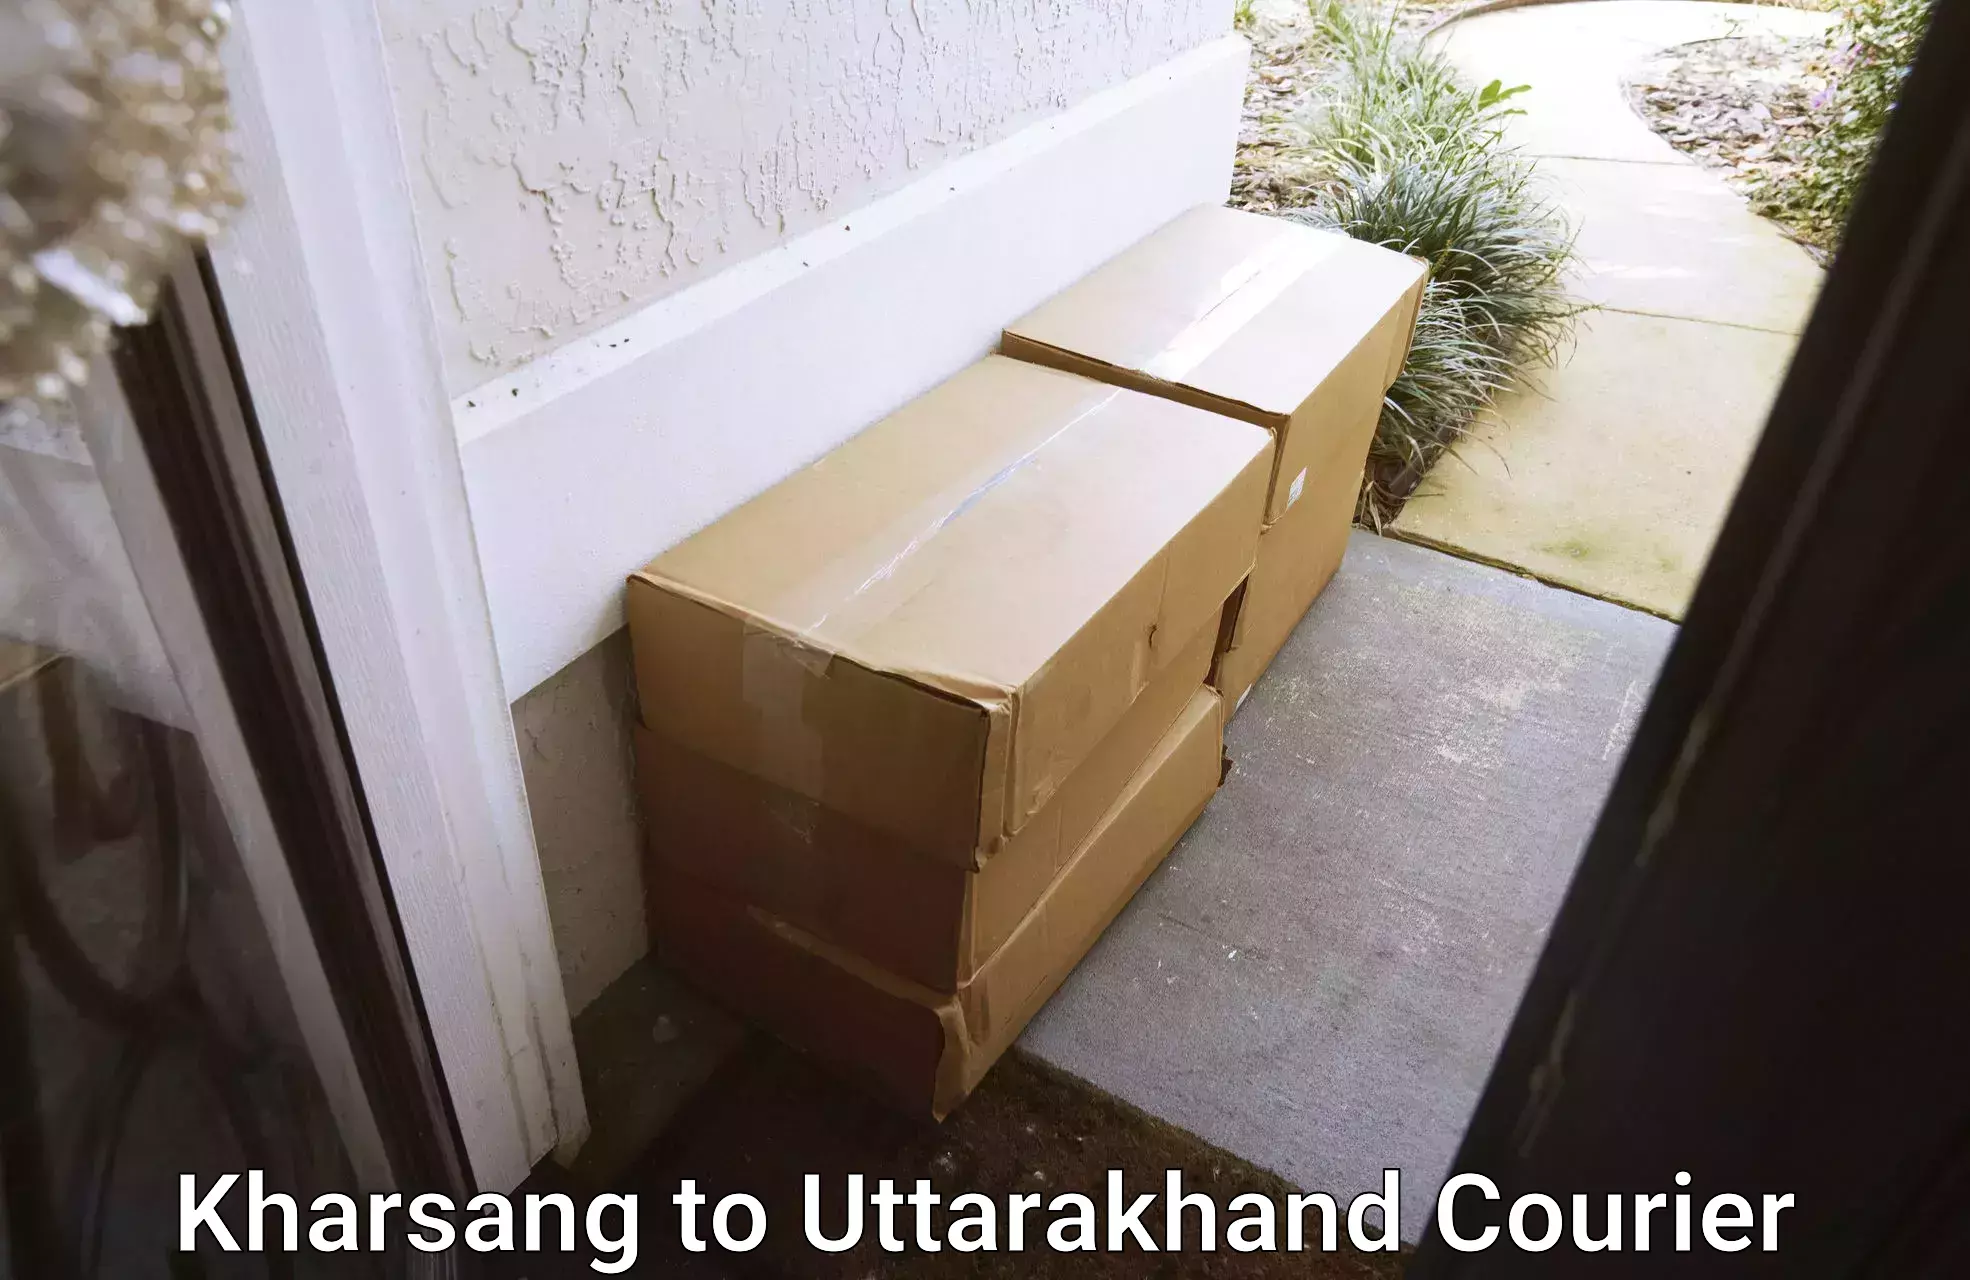 On-call courier service Kharsang to Someshwar